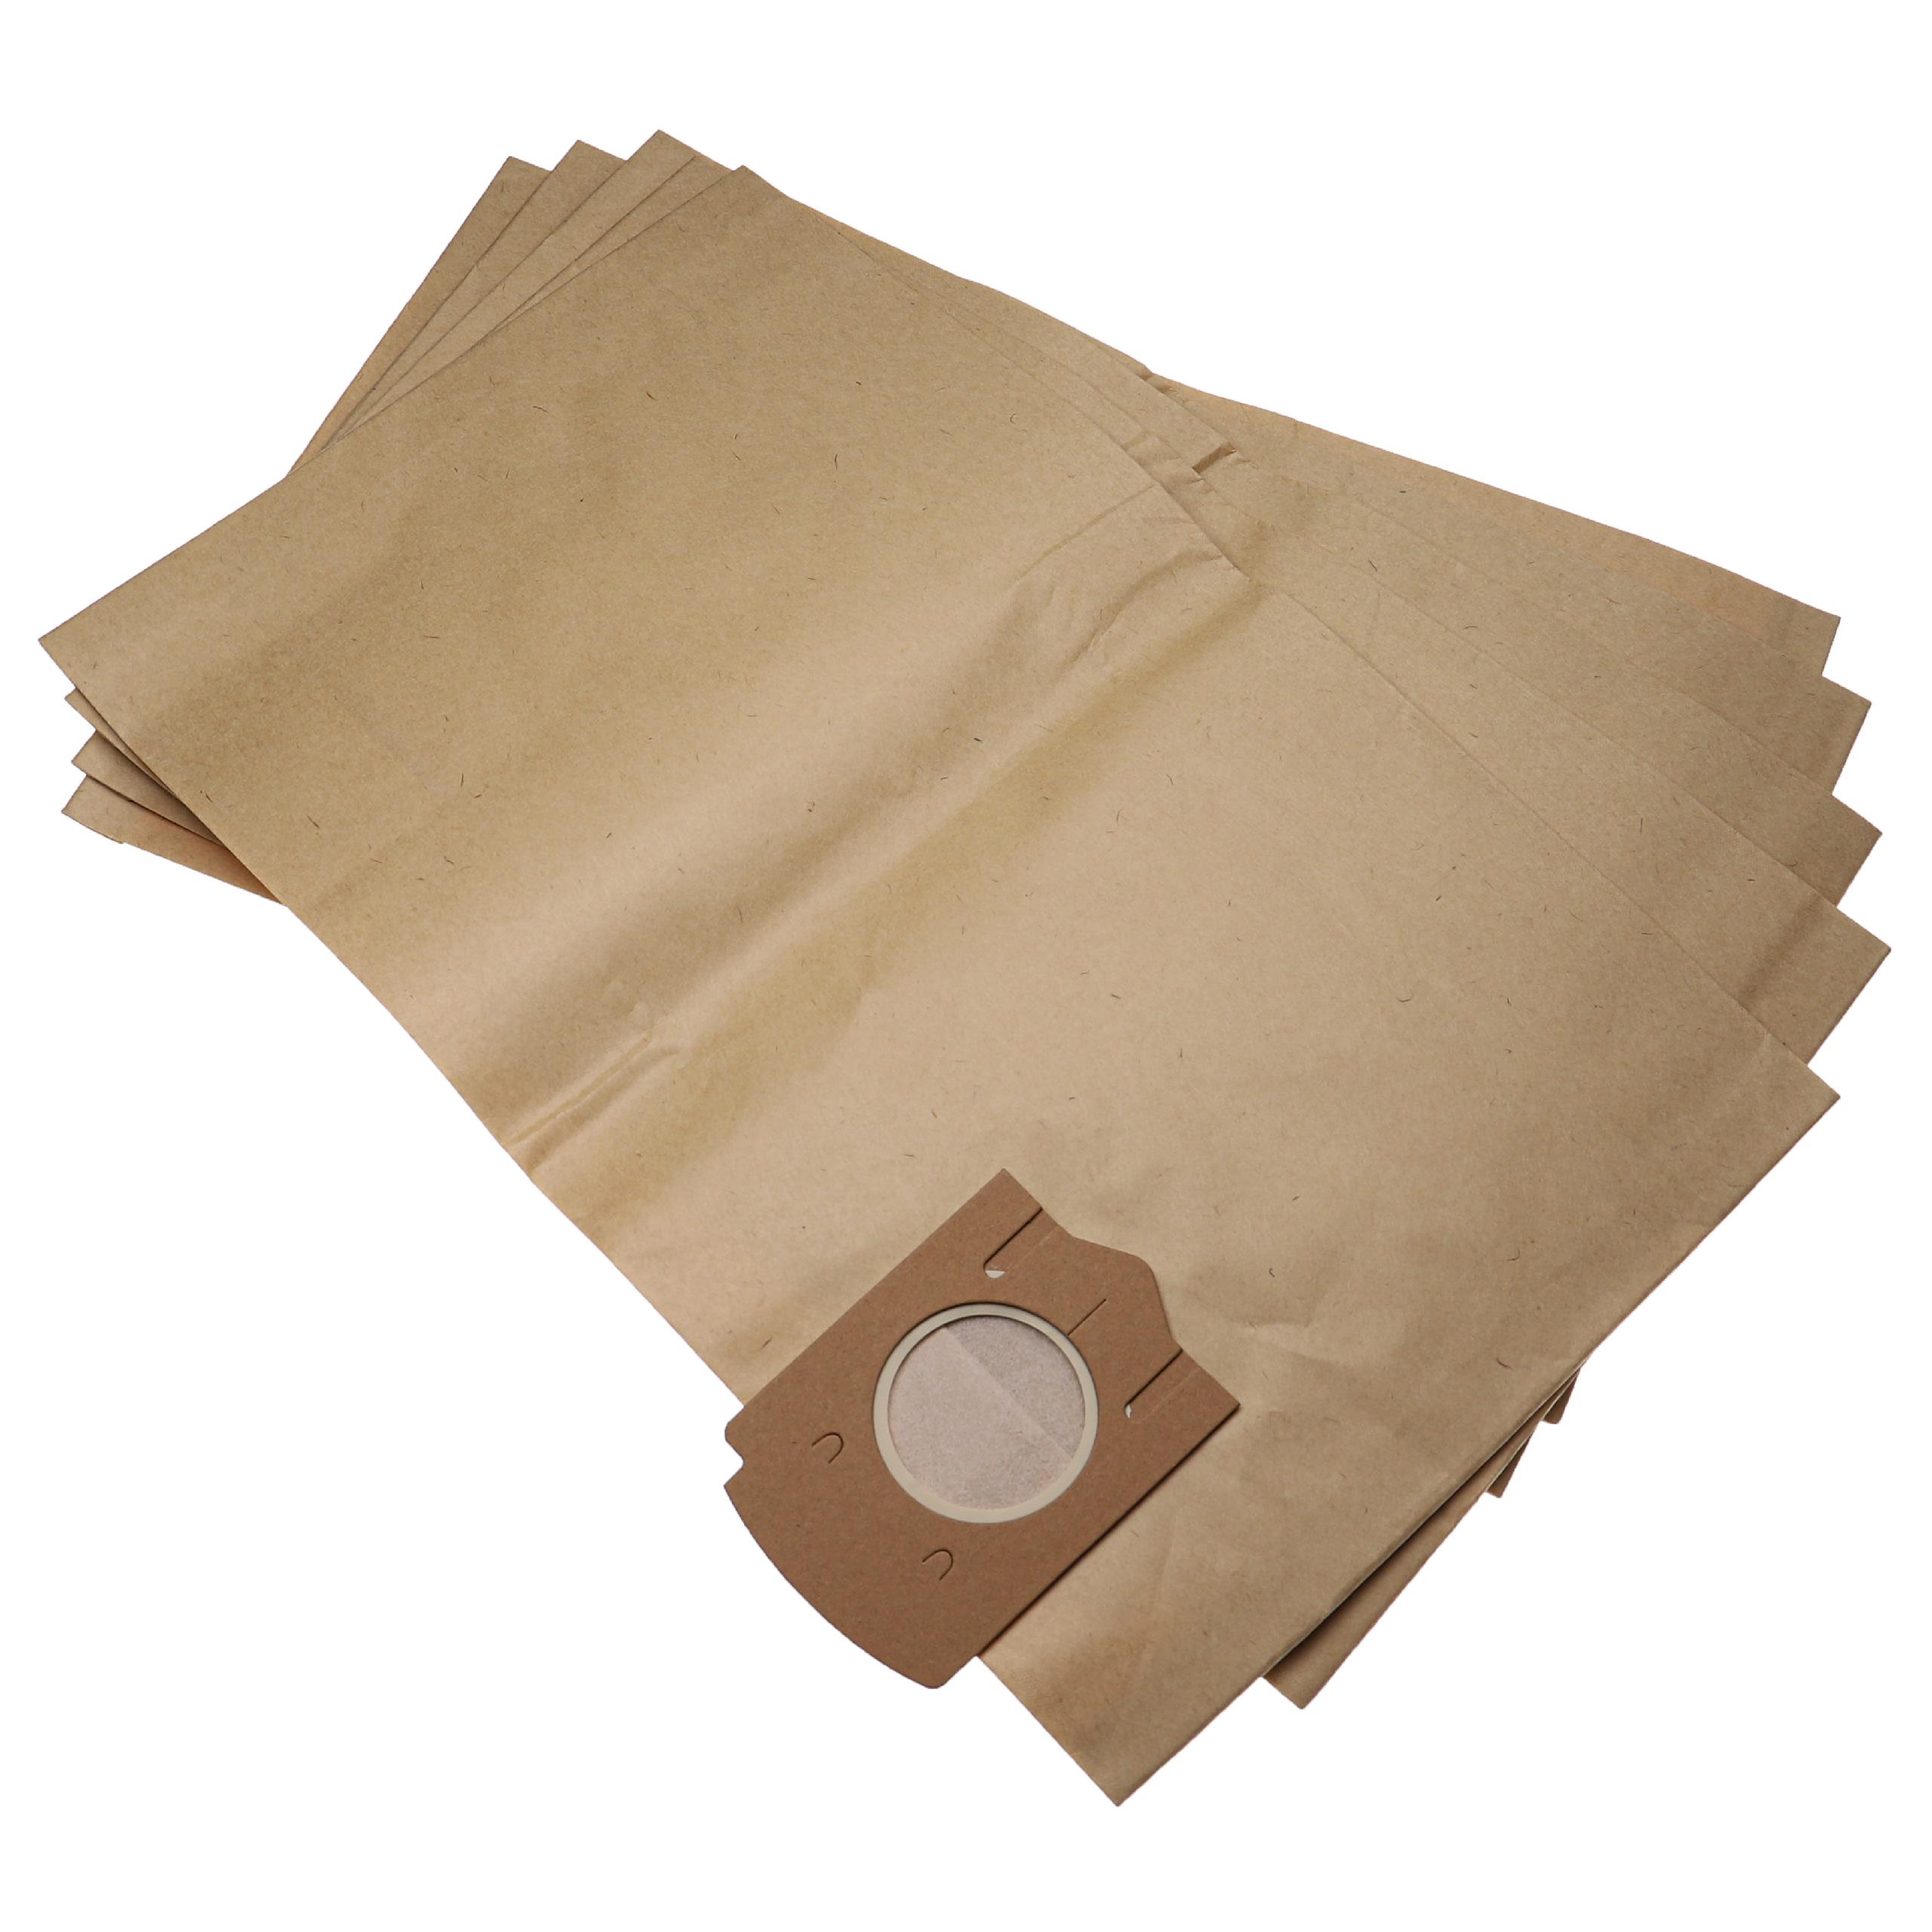 5x Vacuum Cleaner Bag replaces Bosch 2605411061, 3165140073615 for Bosch - paper